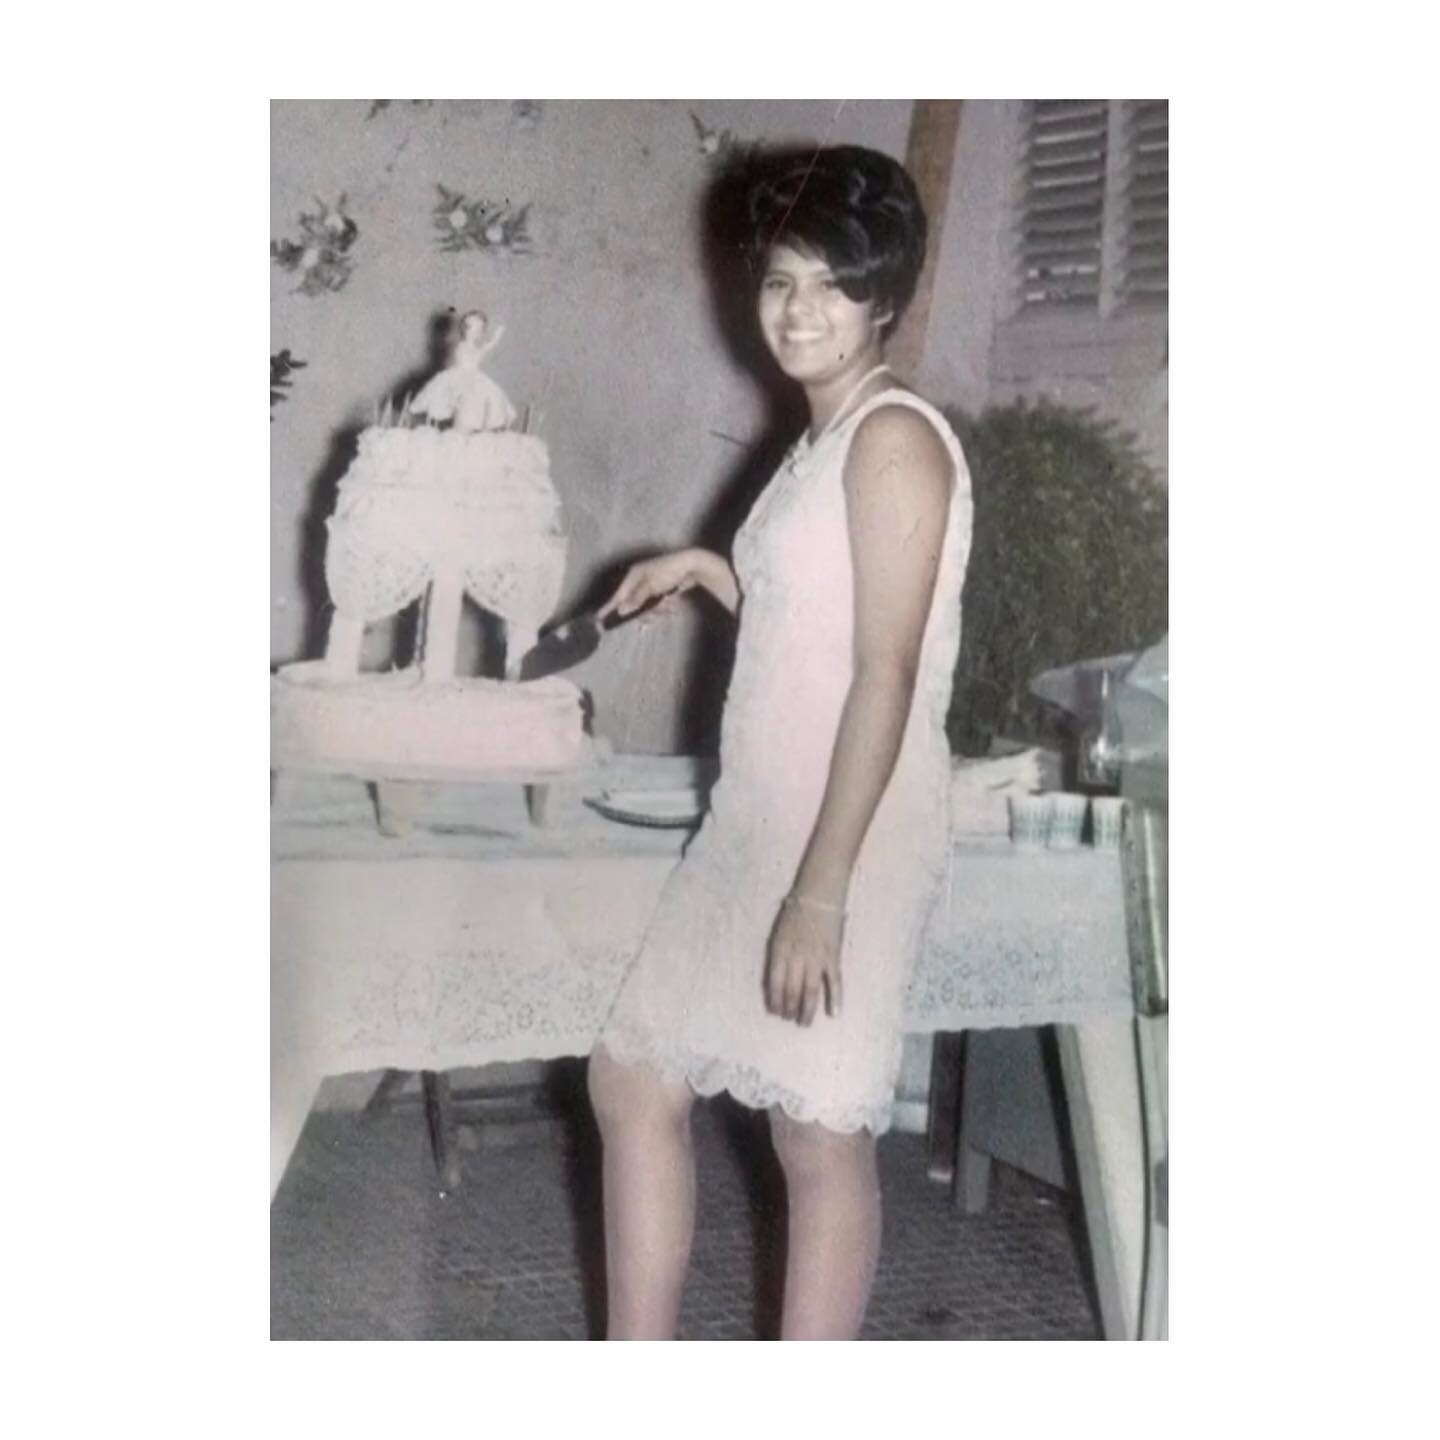 *The epitome of youth culture in Latin America during the 1960s.*

My mother (right) in El Salvador while celebrating her Quincea&ntilde;era (a celebration of a girl's 15th birthday in Latin America) in 1968. Her style was inspired by magazines and t